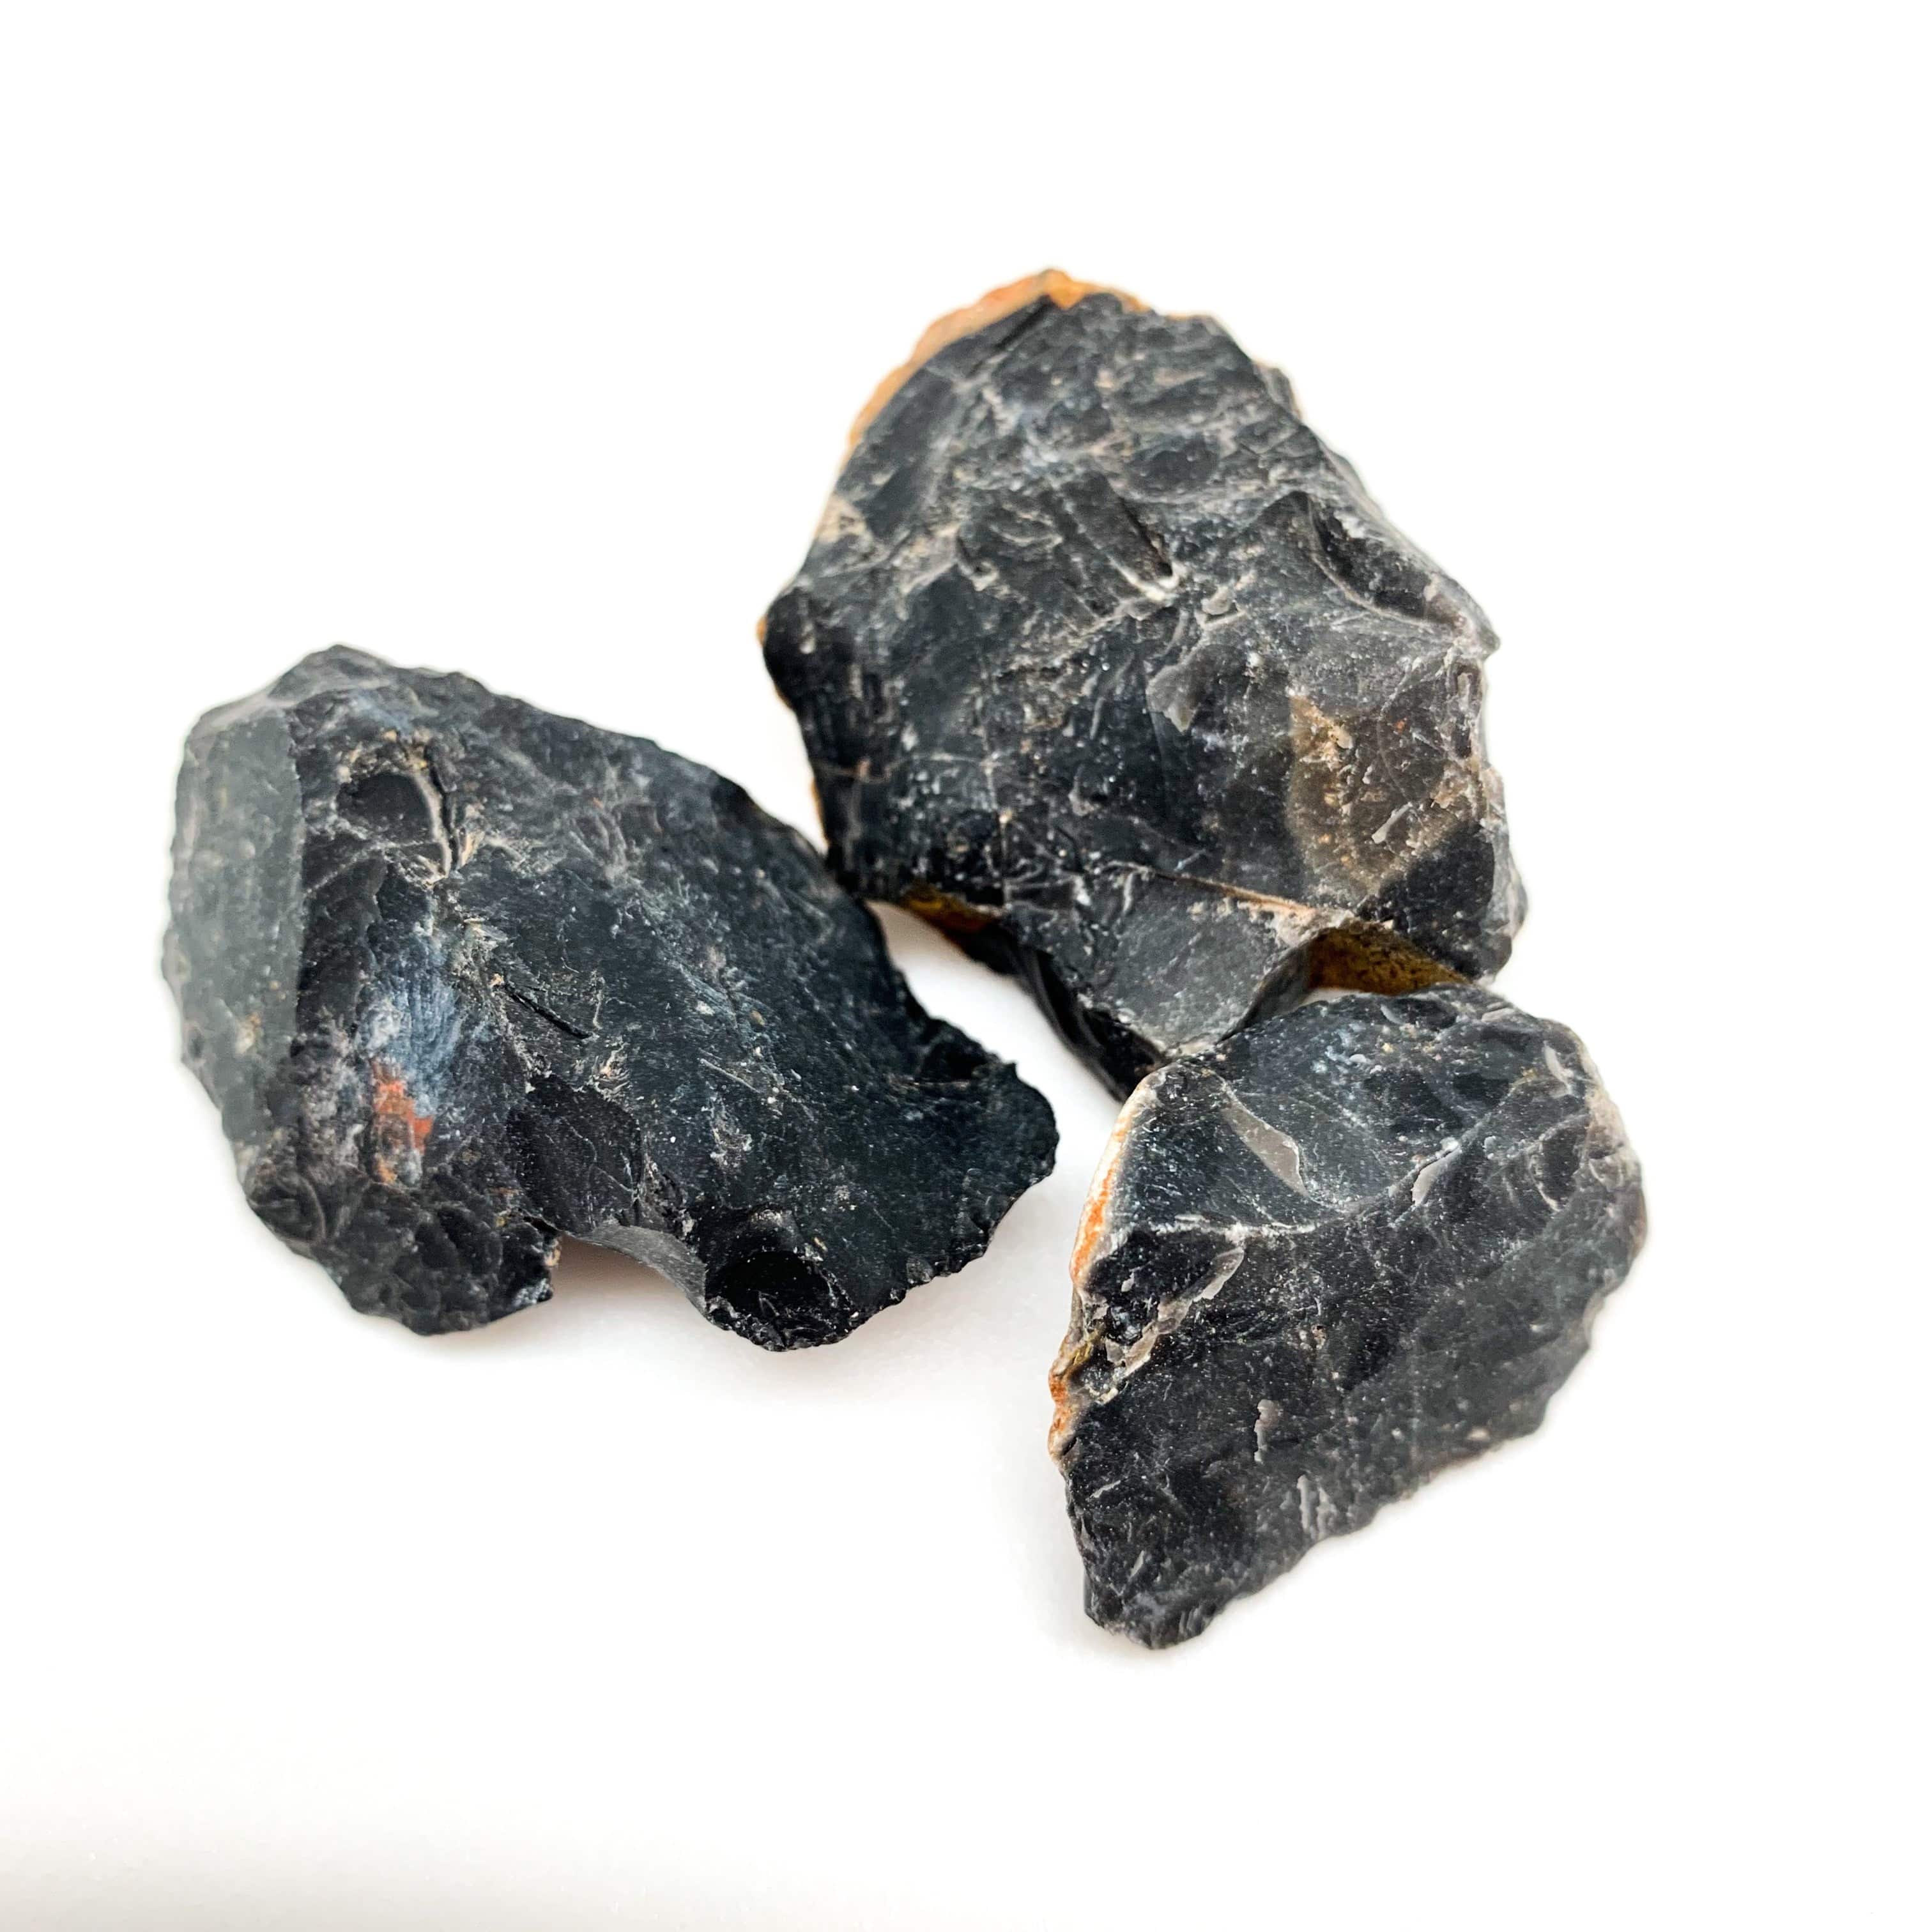 Black Onyx Raw Stones, Large, 15 To 19 Grams, To 1-1/2 Inches